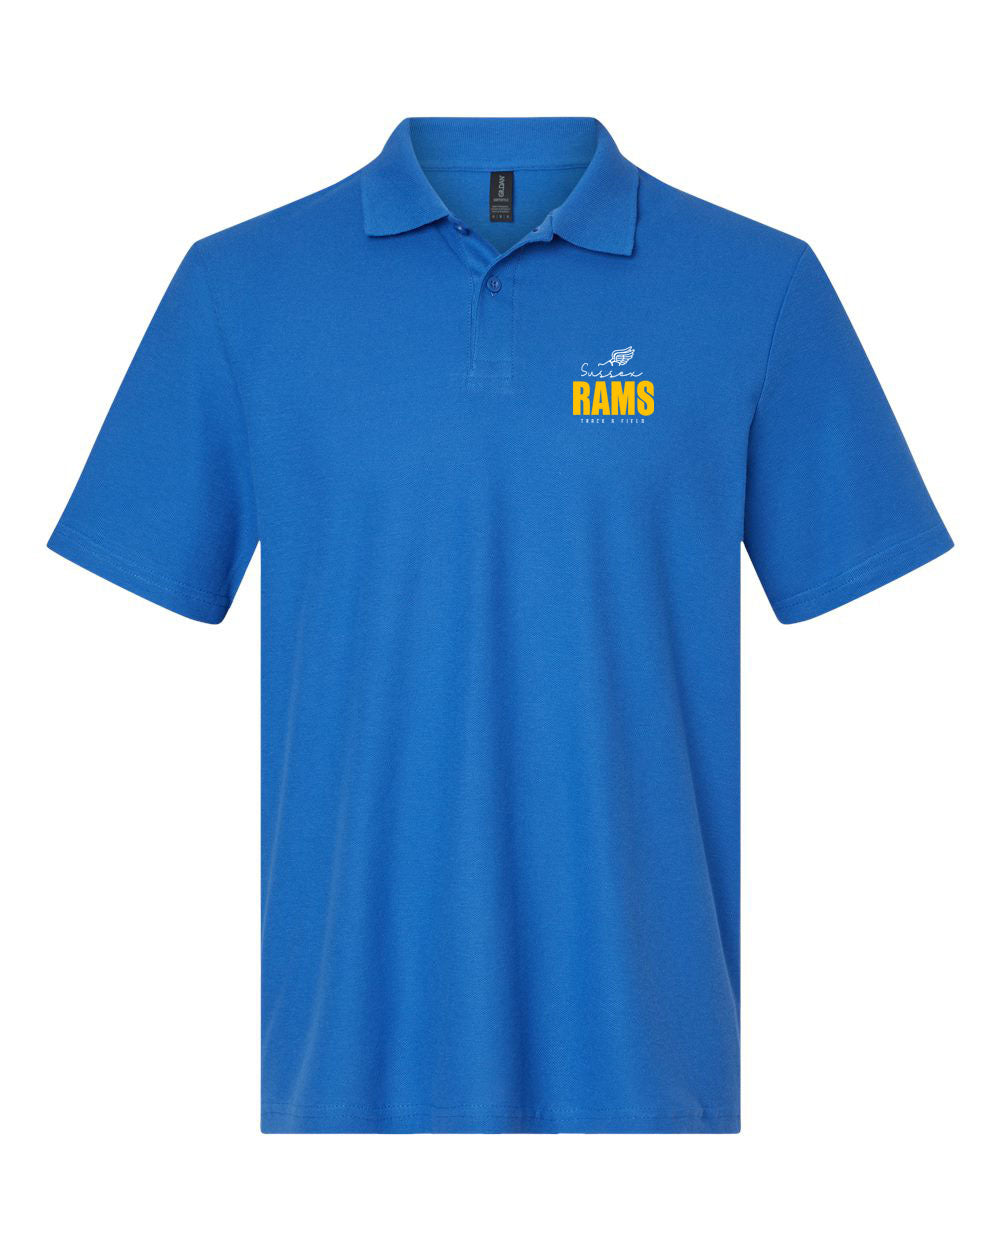 Sussex Rams Track Polo T-Shirt Design 4